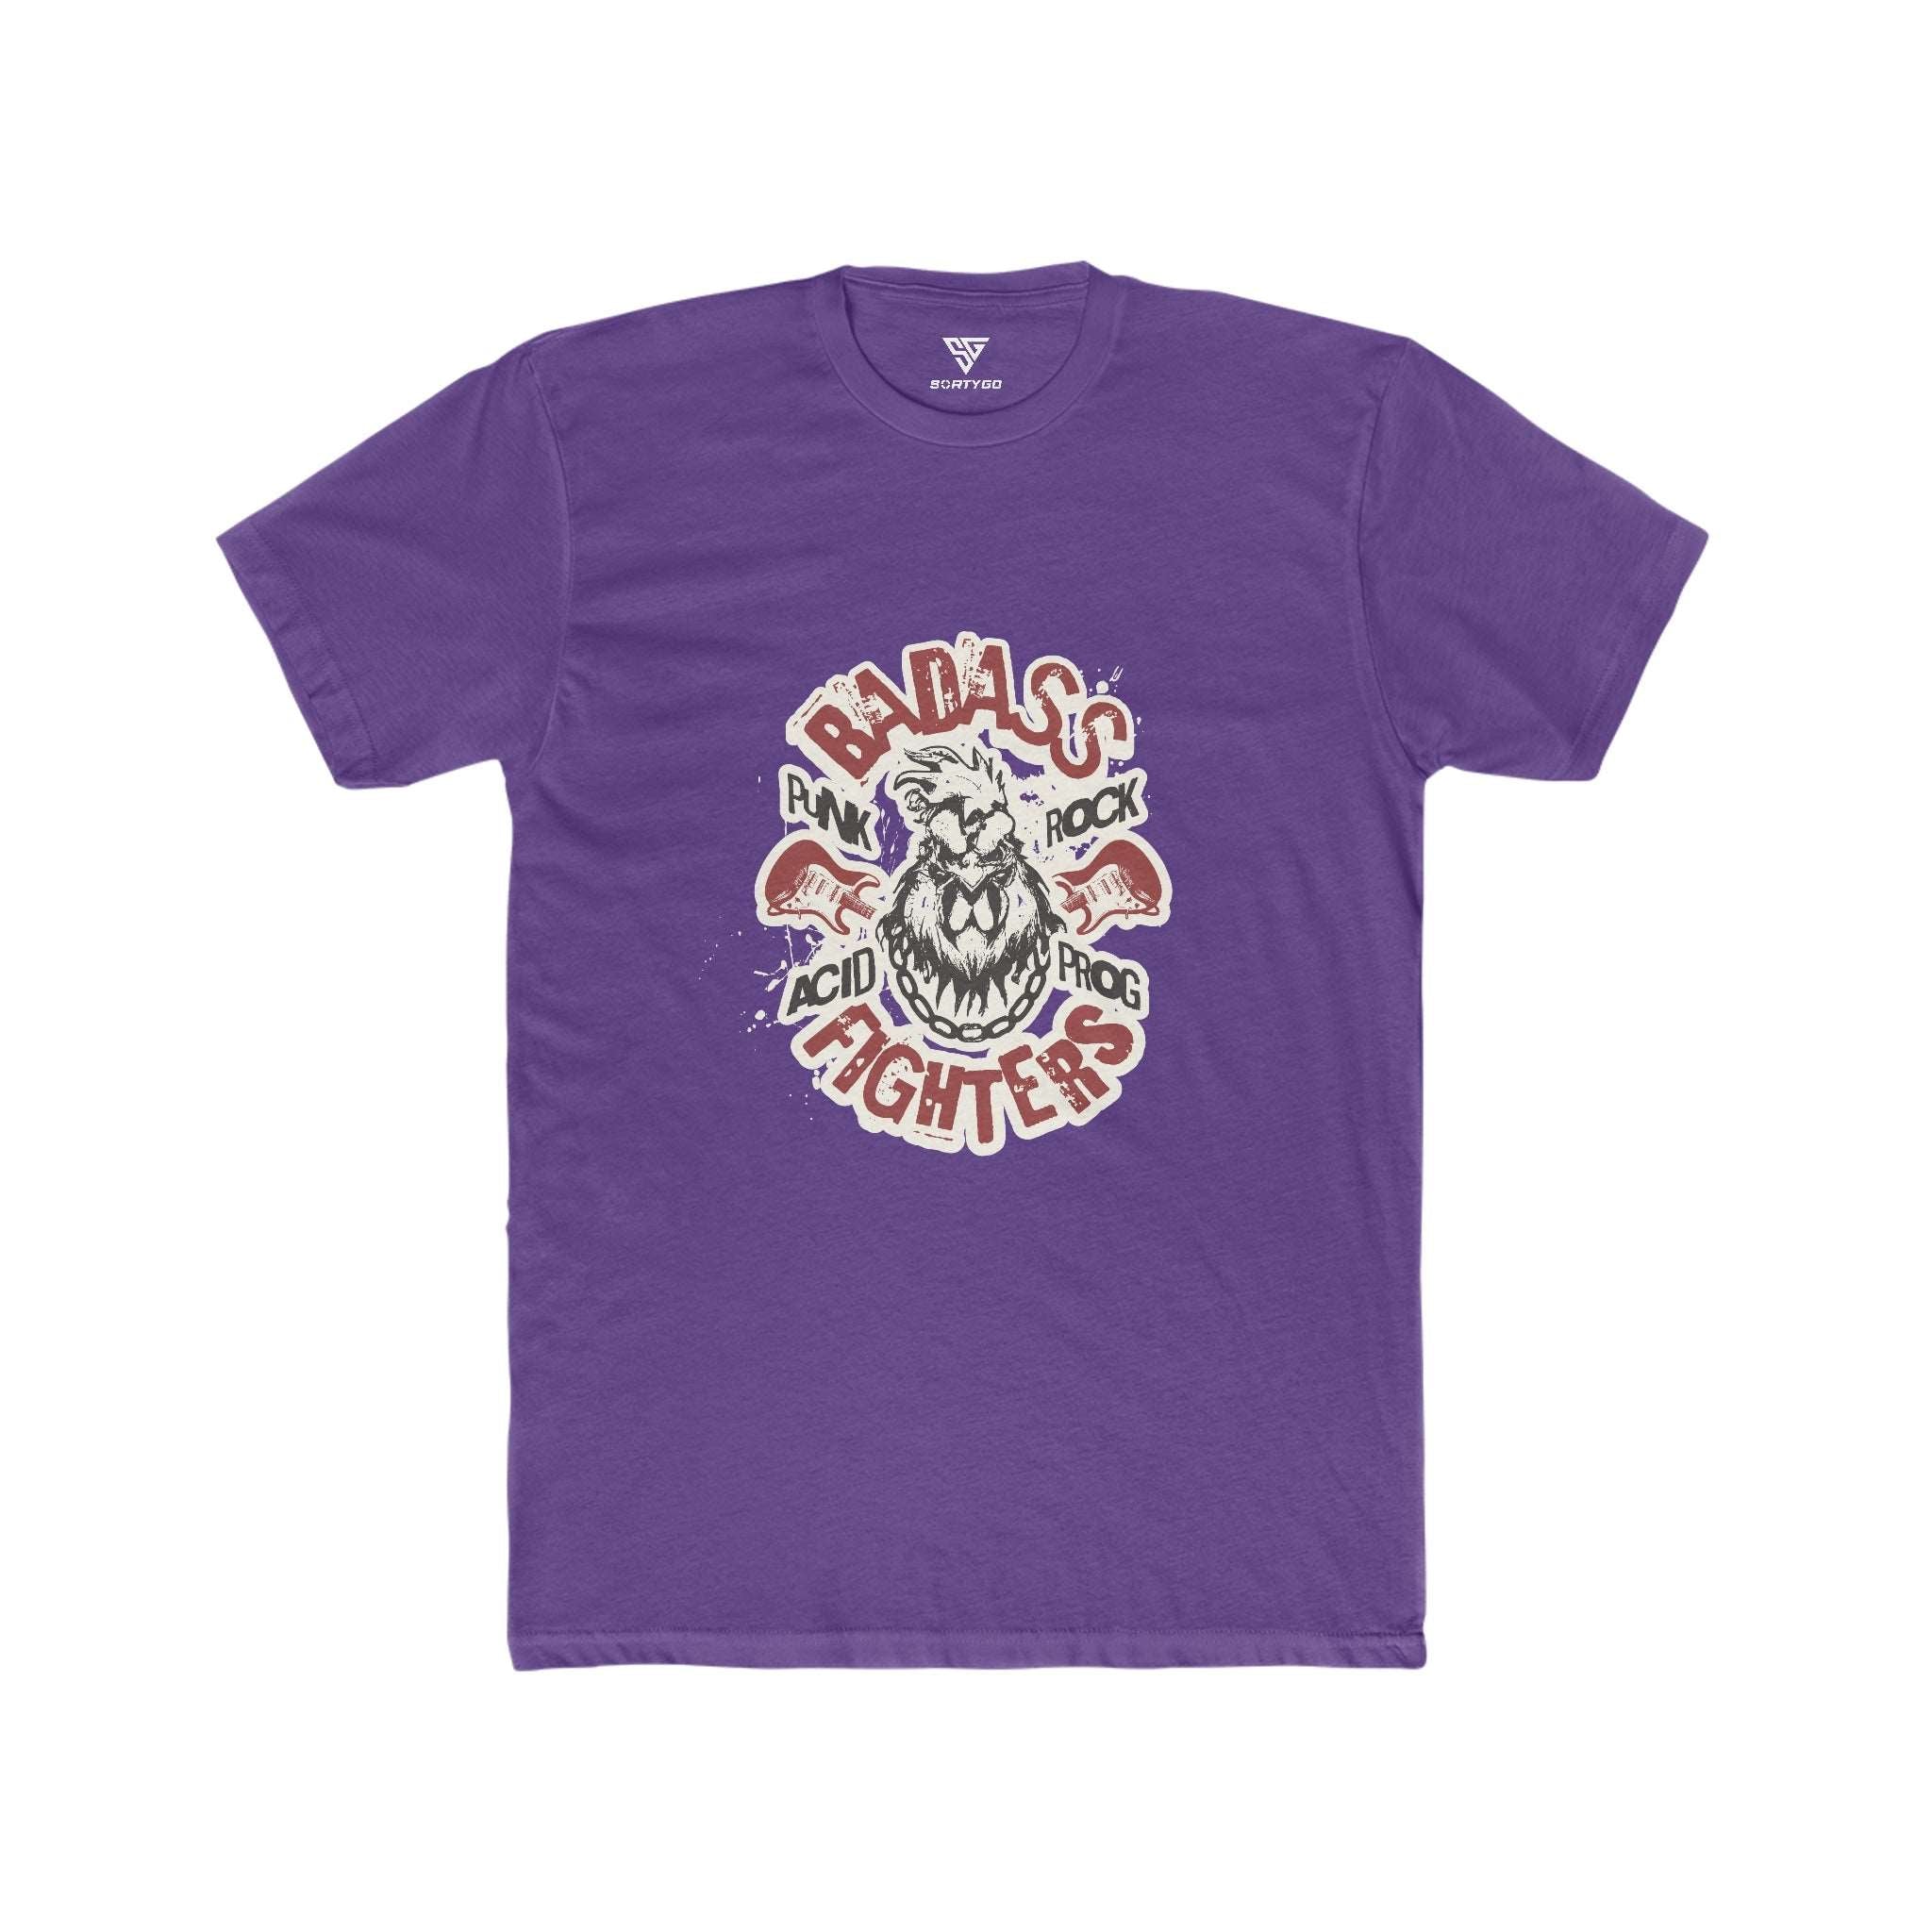 SORTYGO - Badass Fighters Men Fitted T-Shirt in Solid Purple Rush